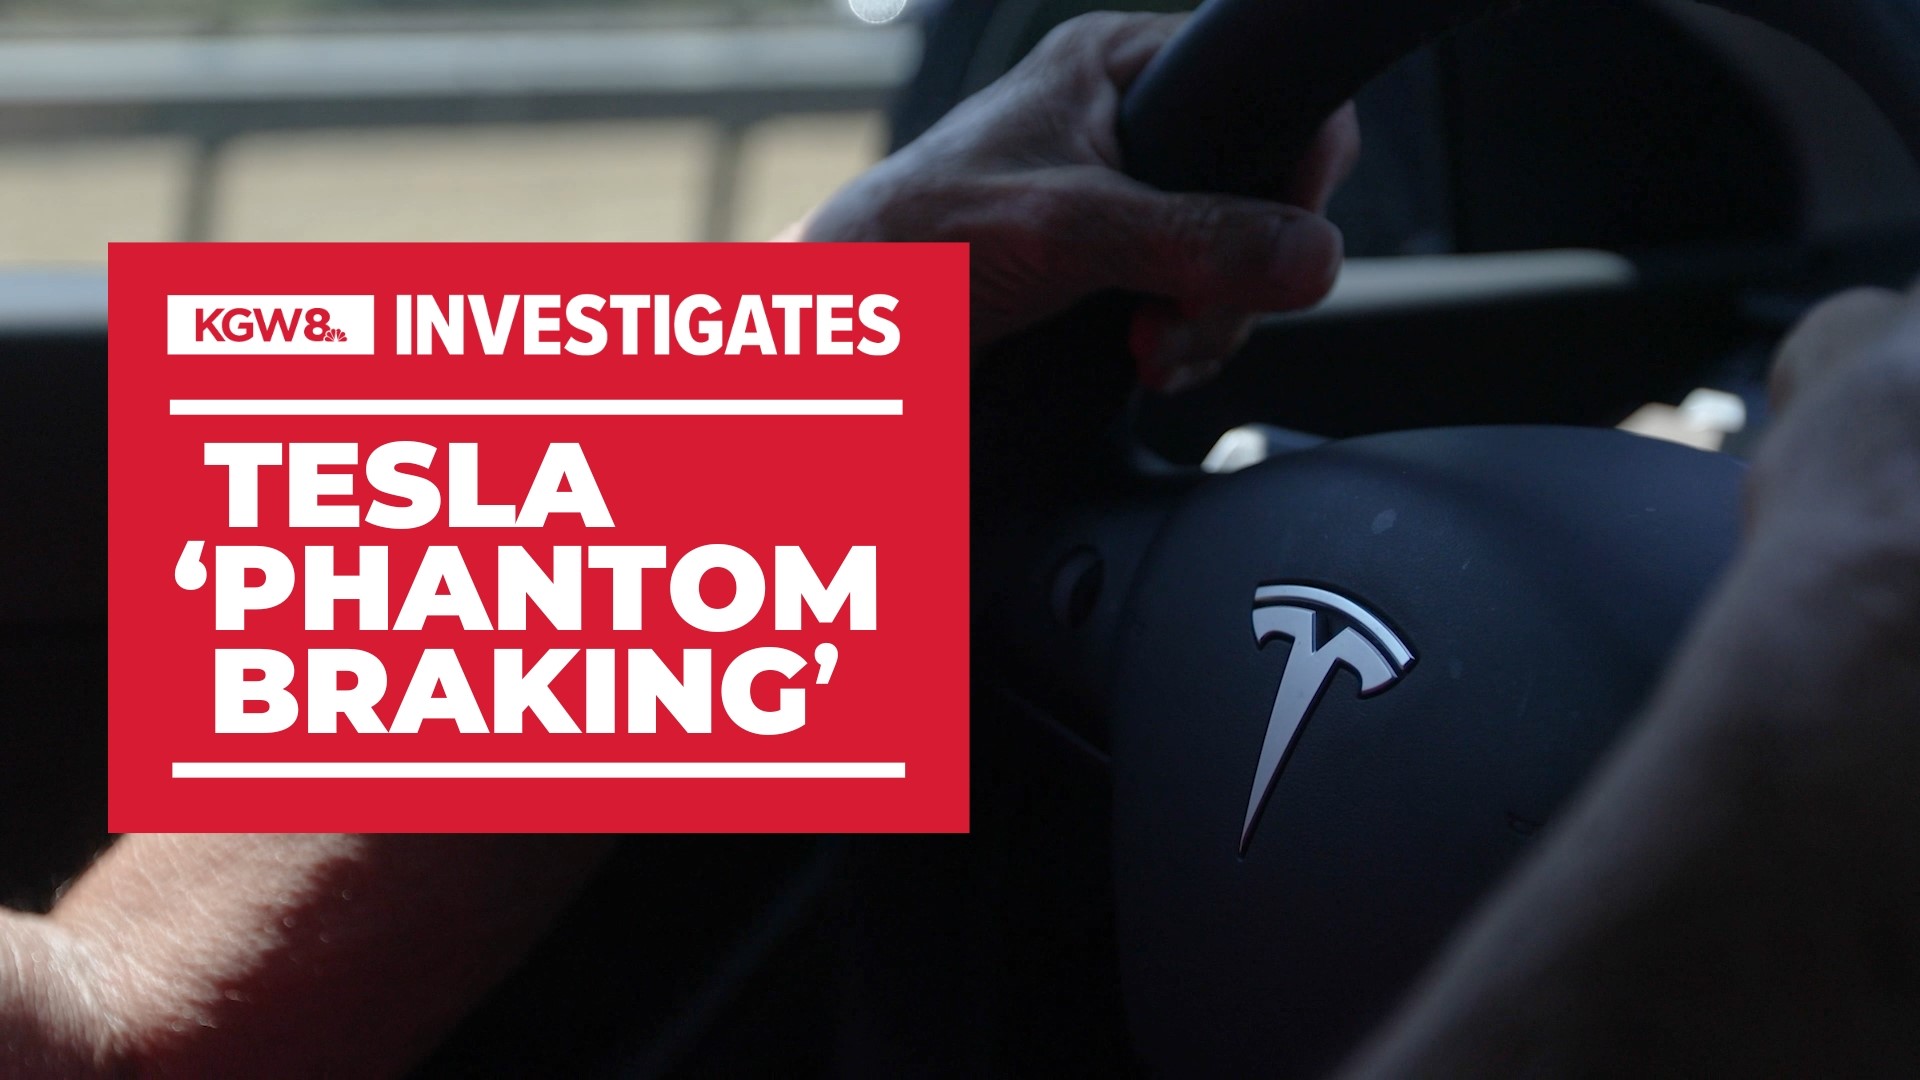 A KGW investigation found incidents of "phantom braking," in which Tesla vehicles suddenly slow down without cause, are more widespread than previously reported.